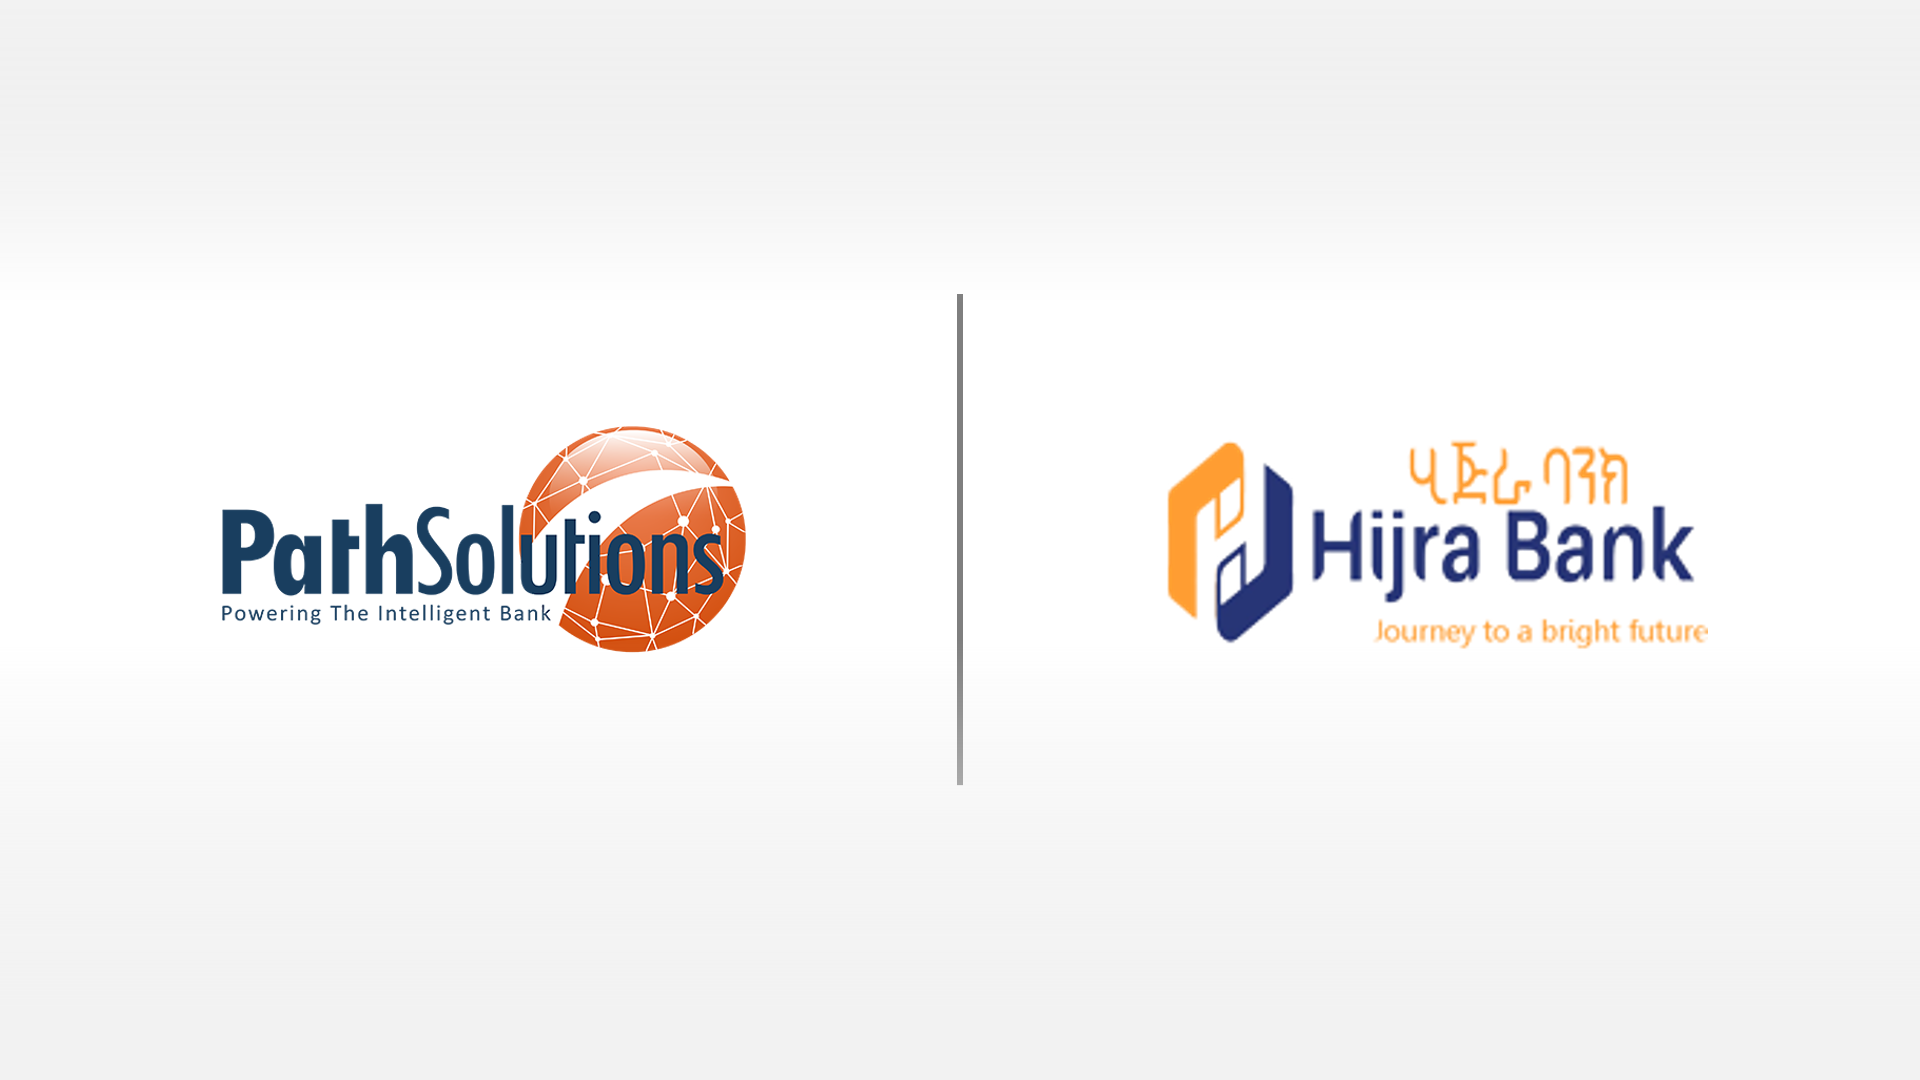  One of the latest banks to join the growing Islamic banking sector in Ethiopia, Hijra Bank awards core banking platform contract to software giant Path Solutions